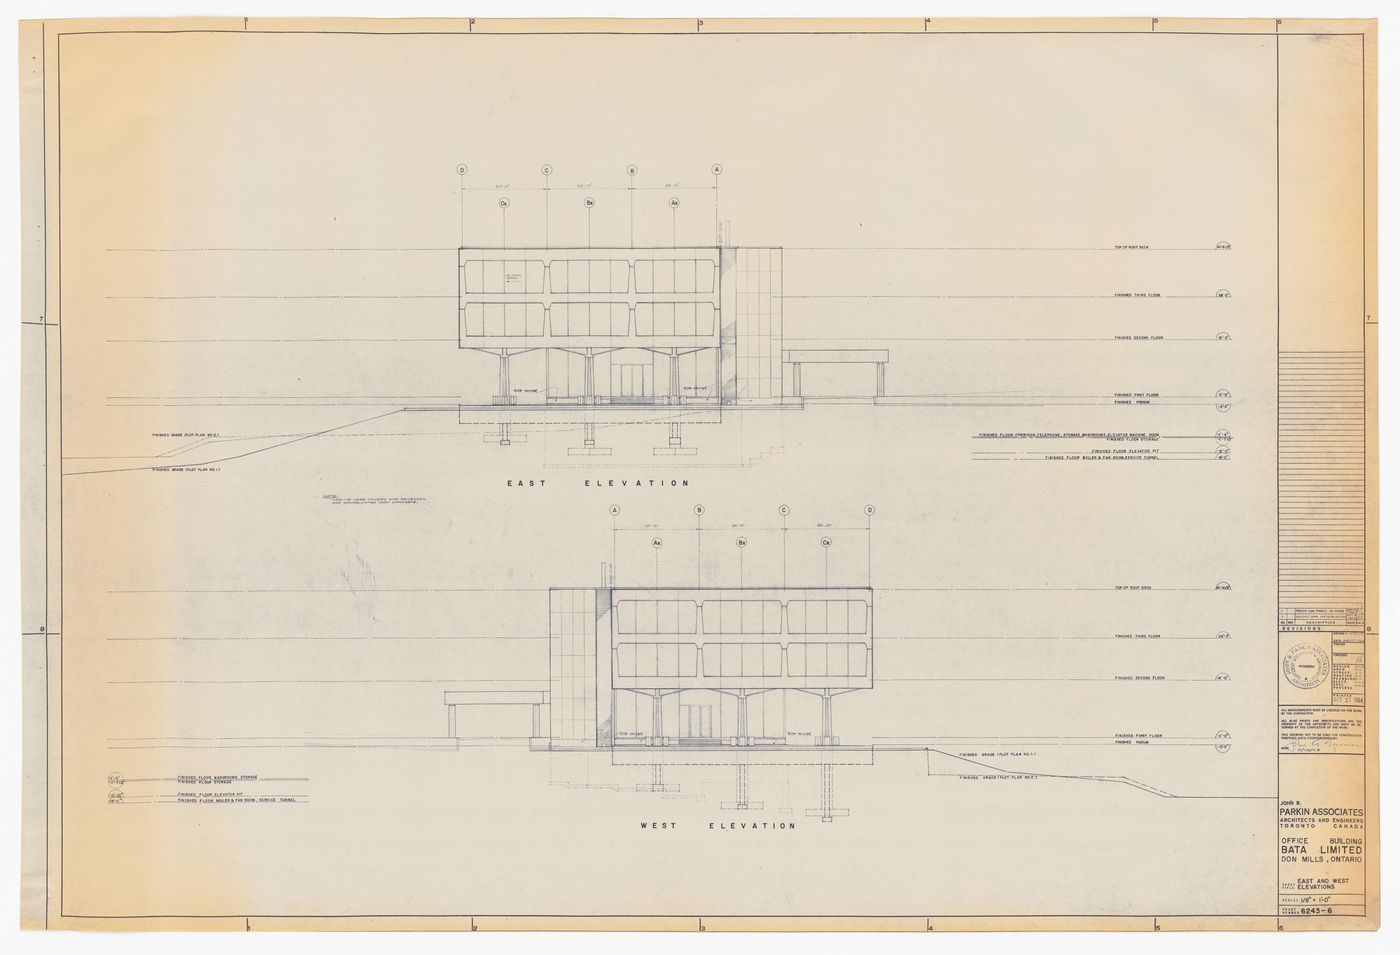 East and west elevations for Bata Limited Office Building, Don Mills, Ontario